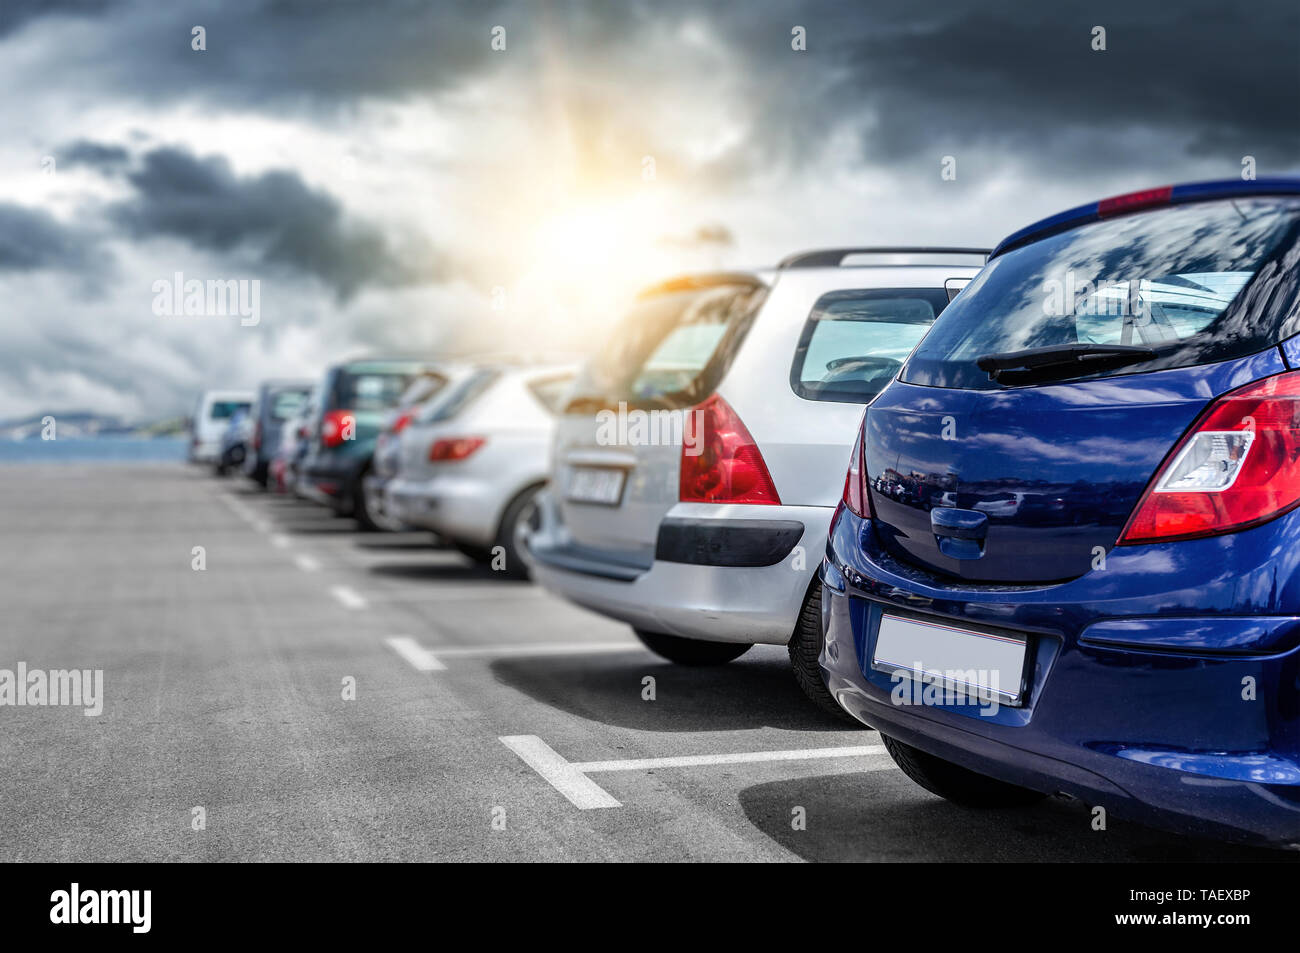 Cars in the parking lot. Stock Photo